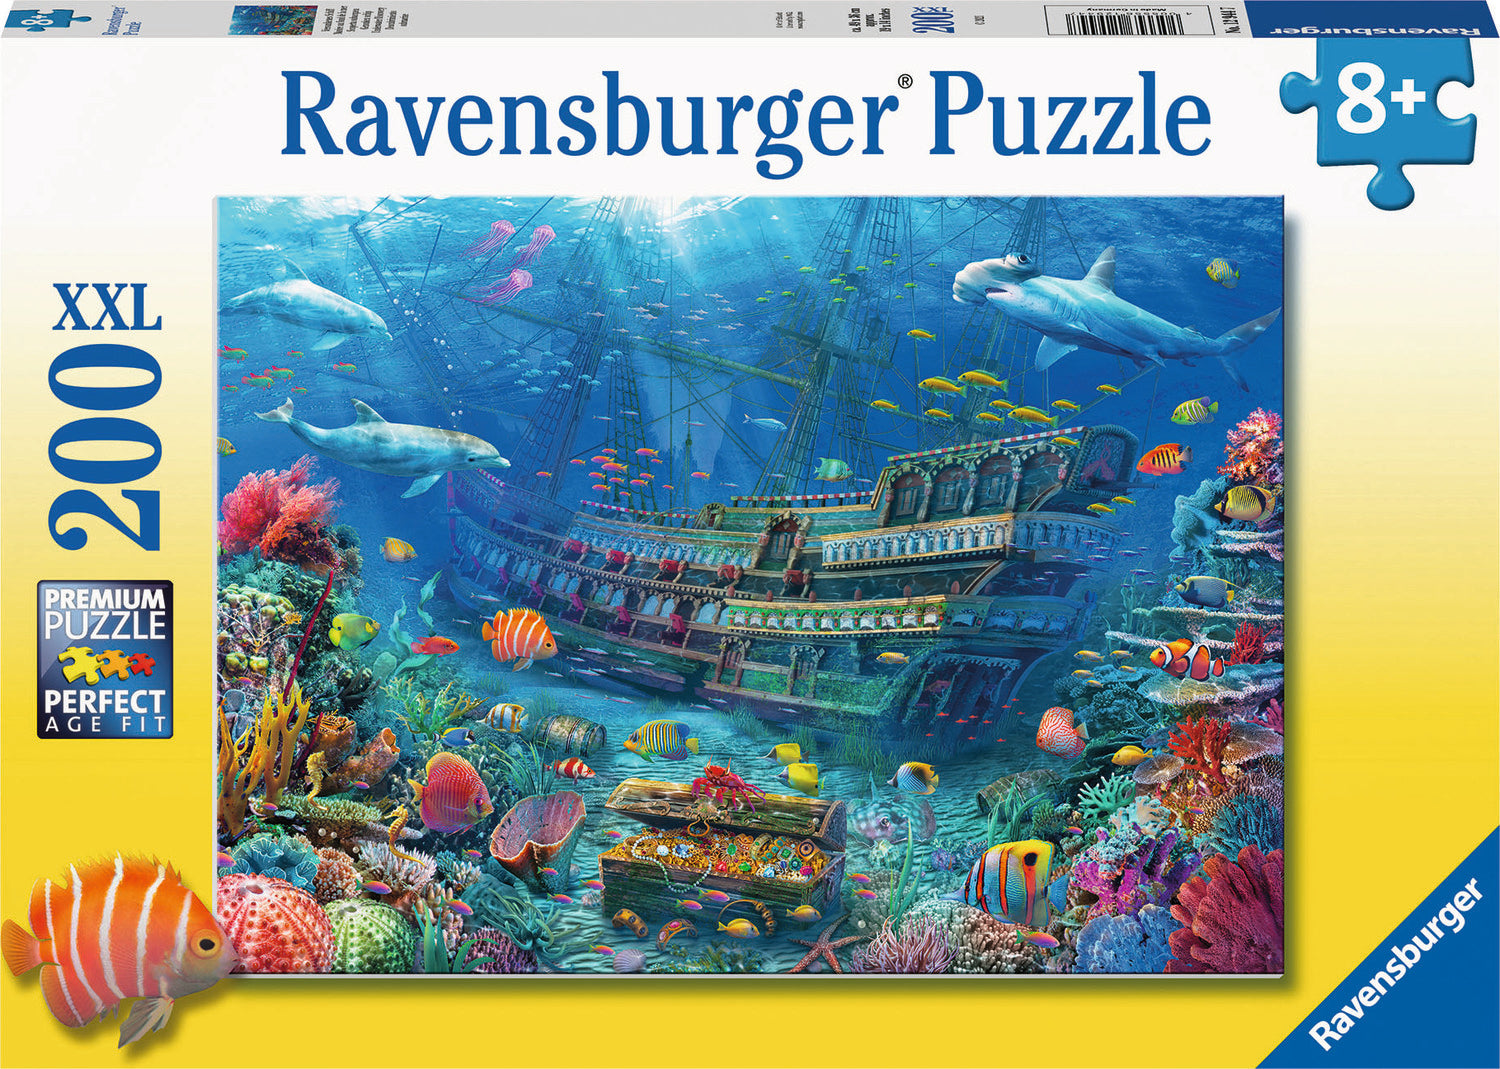 Underwater Discovery (200 pc Puzzle)